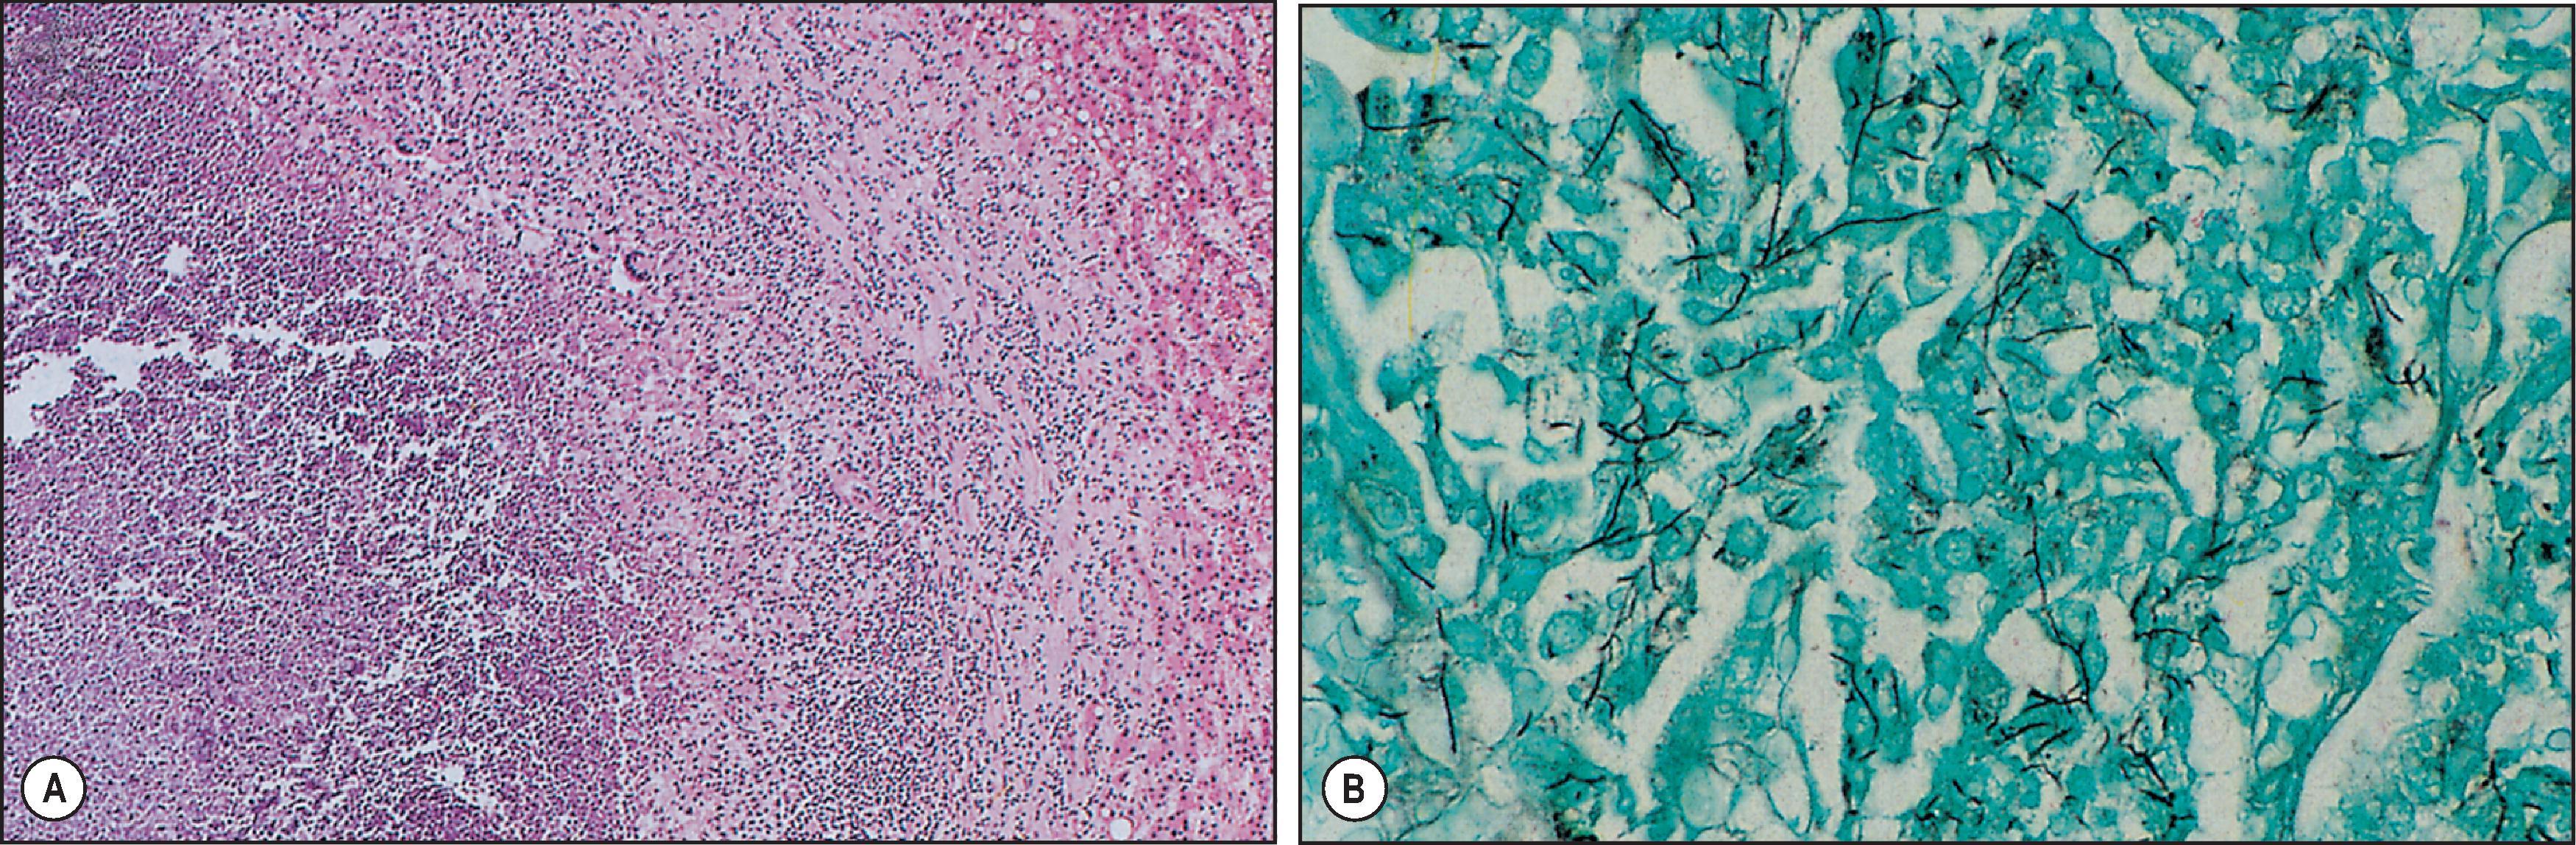 Figure 7.36, Nocardiosis. (A) Edge of a liver abscess with a purulent centre and a granulomatous border; note the giant cell. (H&E stain.) (B) Clusters of thin, branching filaments of Nocardia asteroides within the abscess. (Grocott stain.)